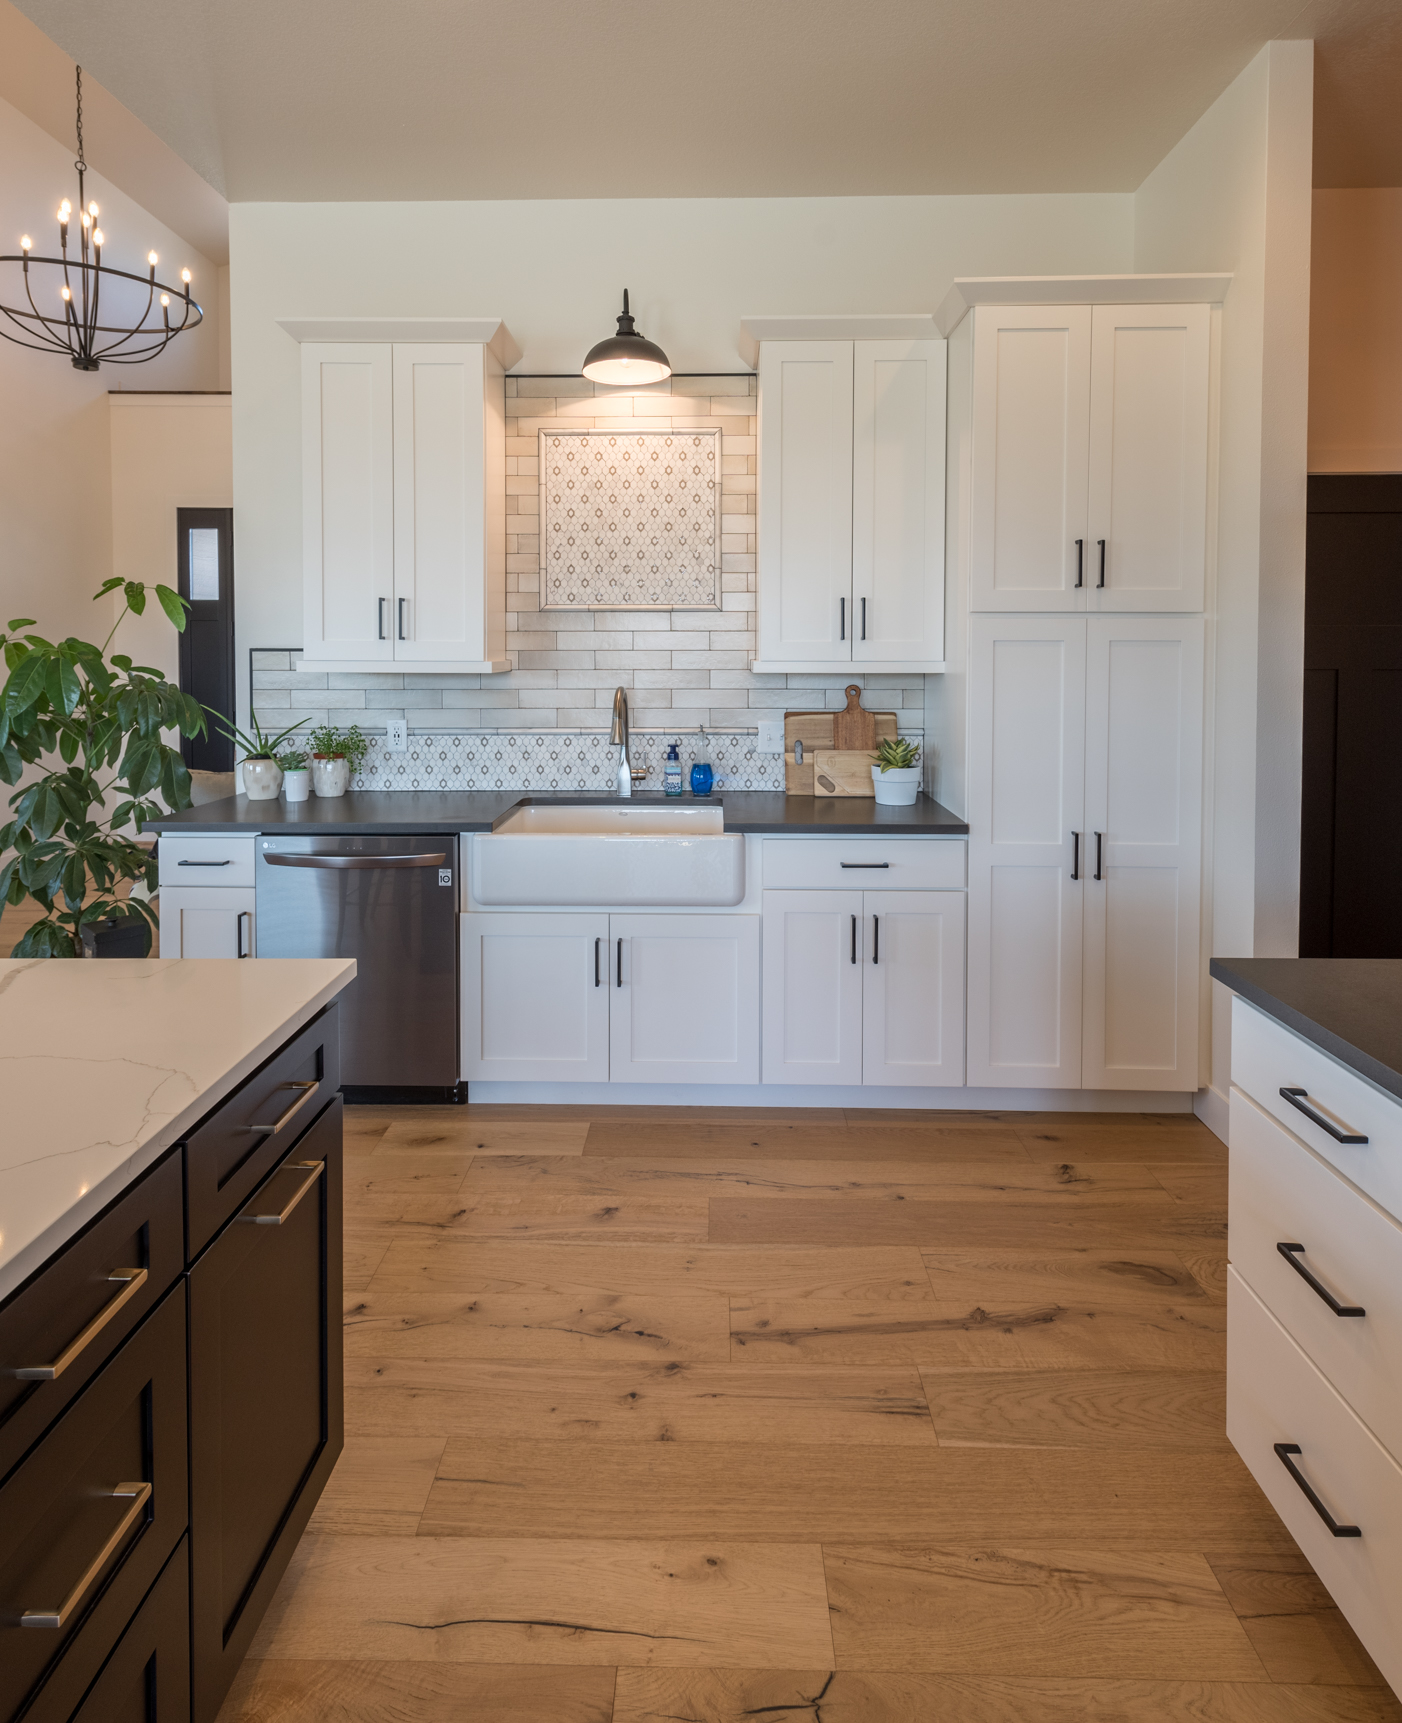 White kitchen cabinets, white & gray countertops with intricate patterned backsplashes